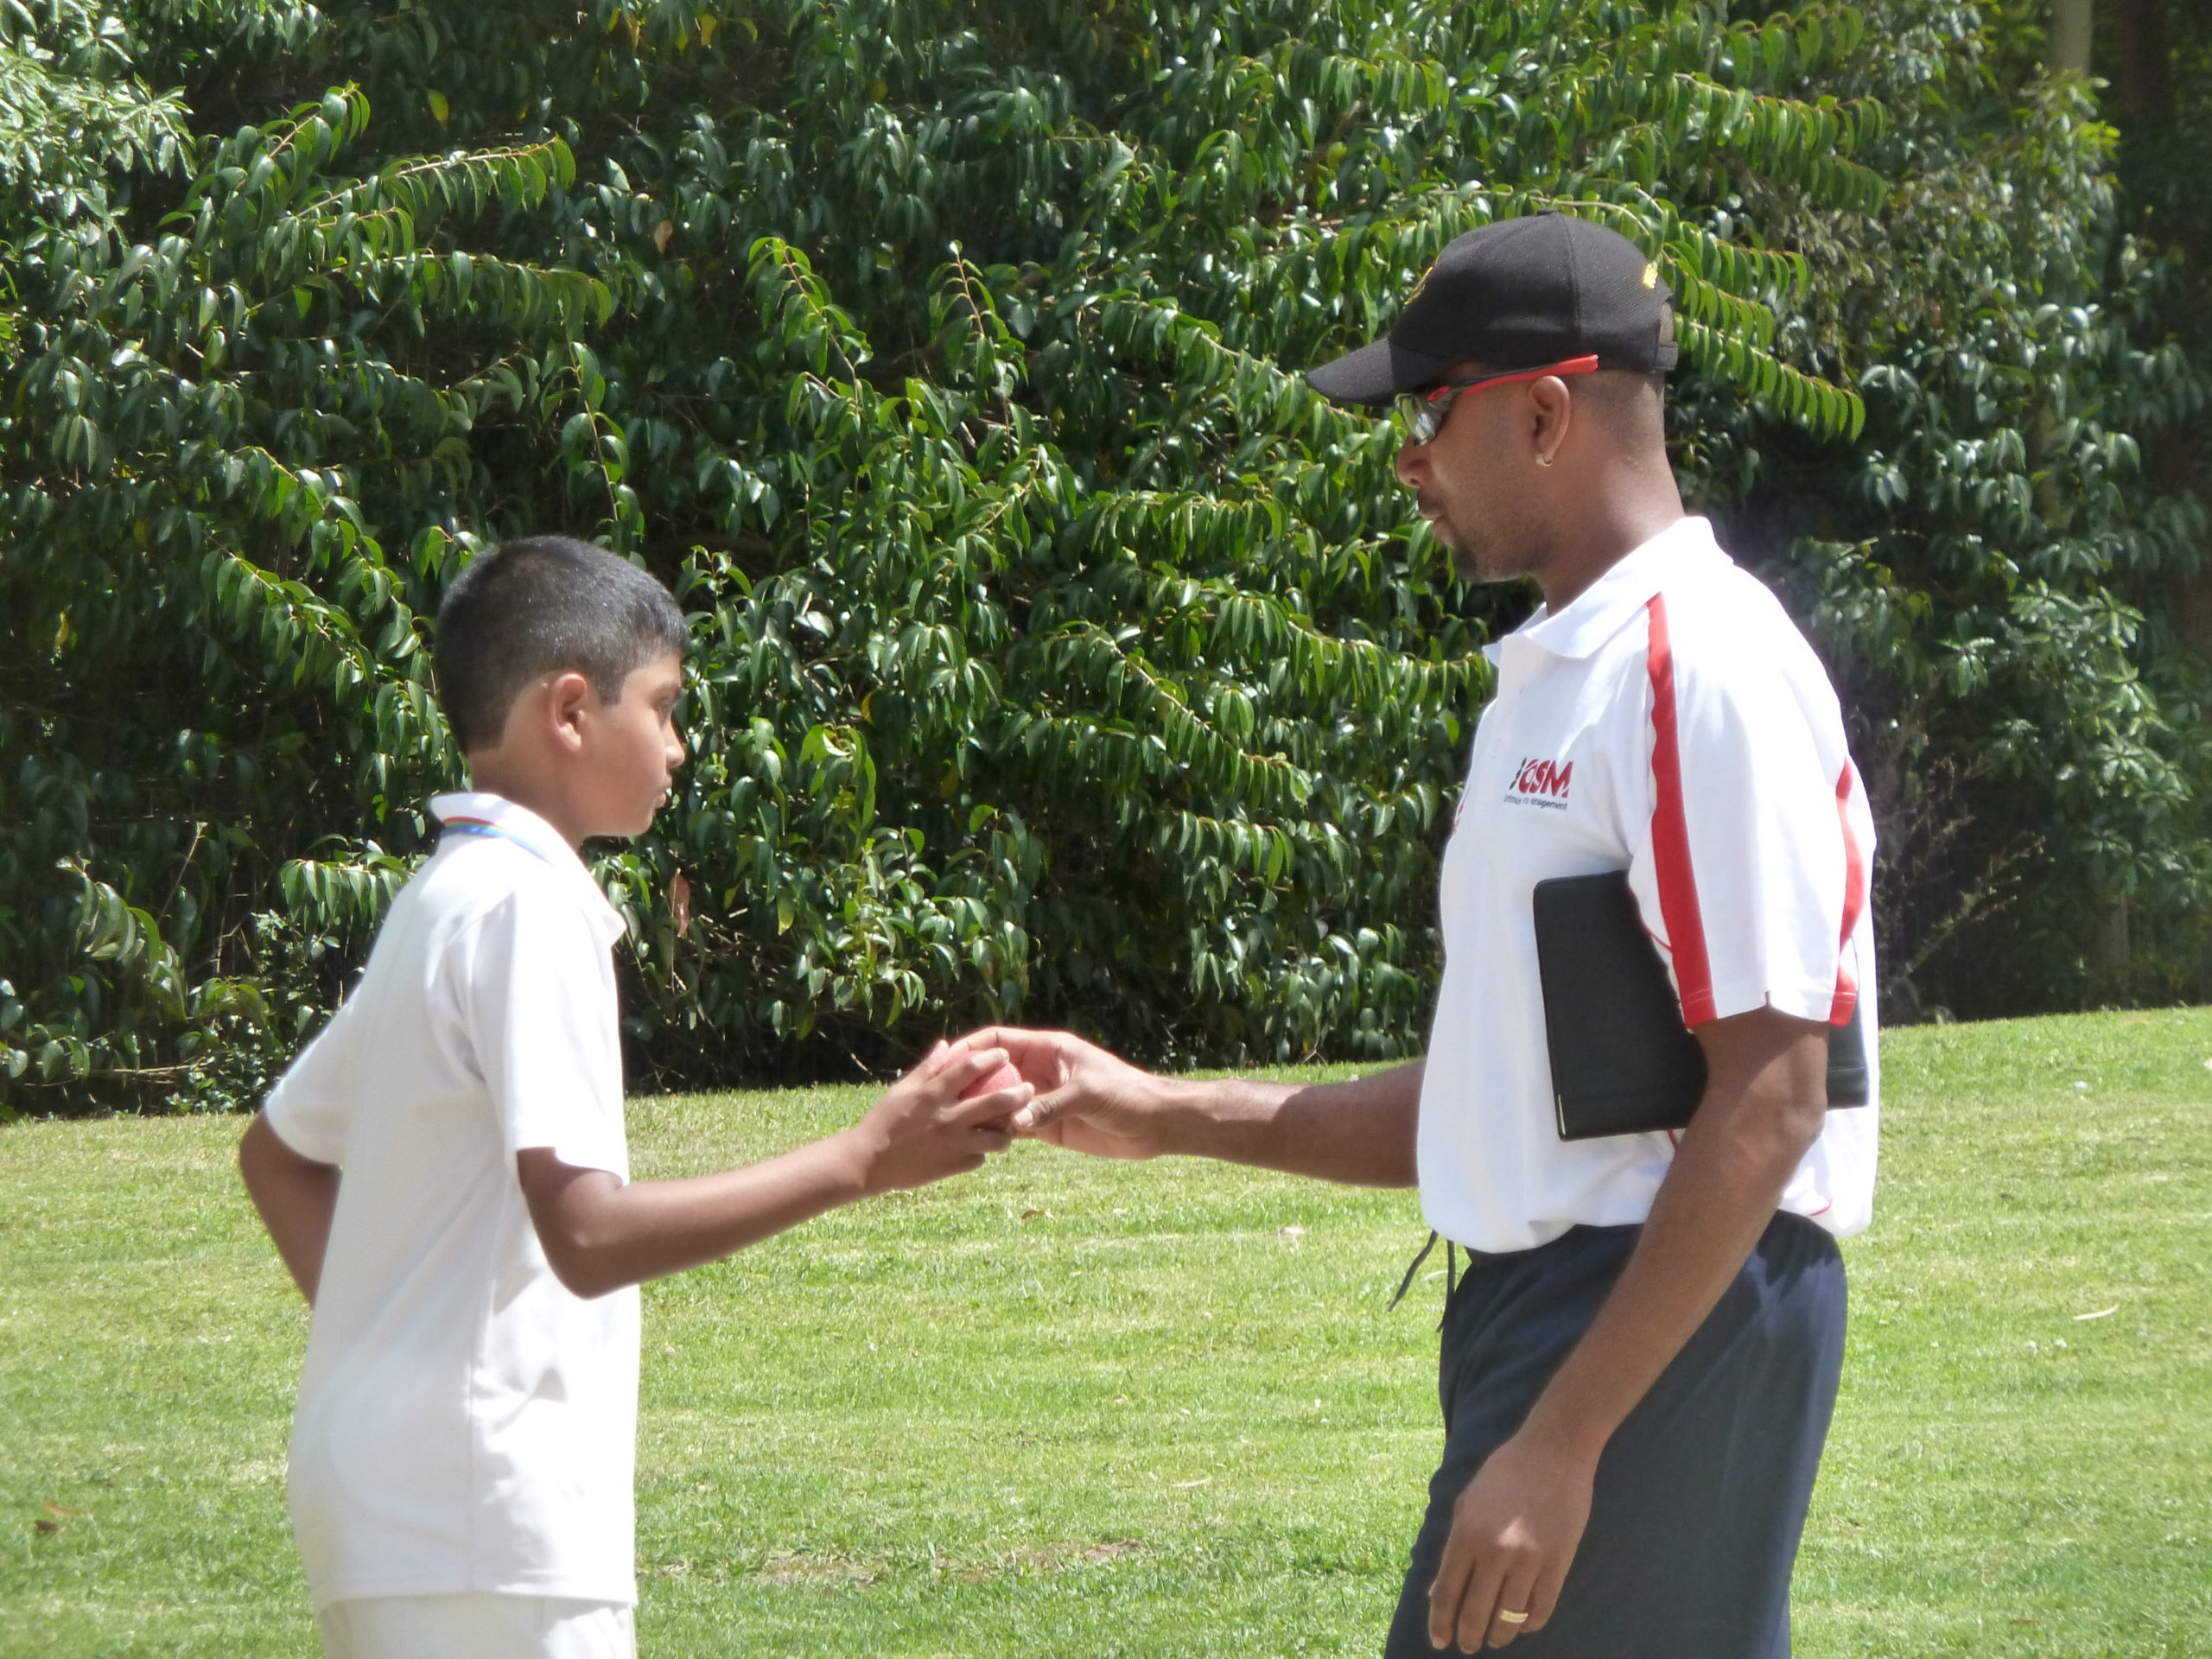 Corey Collymore (West Indies fast bowler) at the Craig McDermott Coaching Clinic - Sports Club Sunday 11 November 2012.